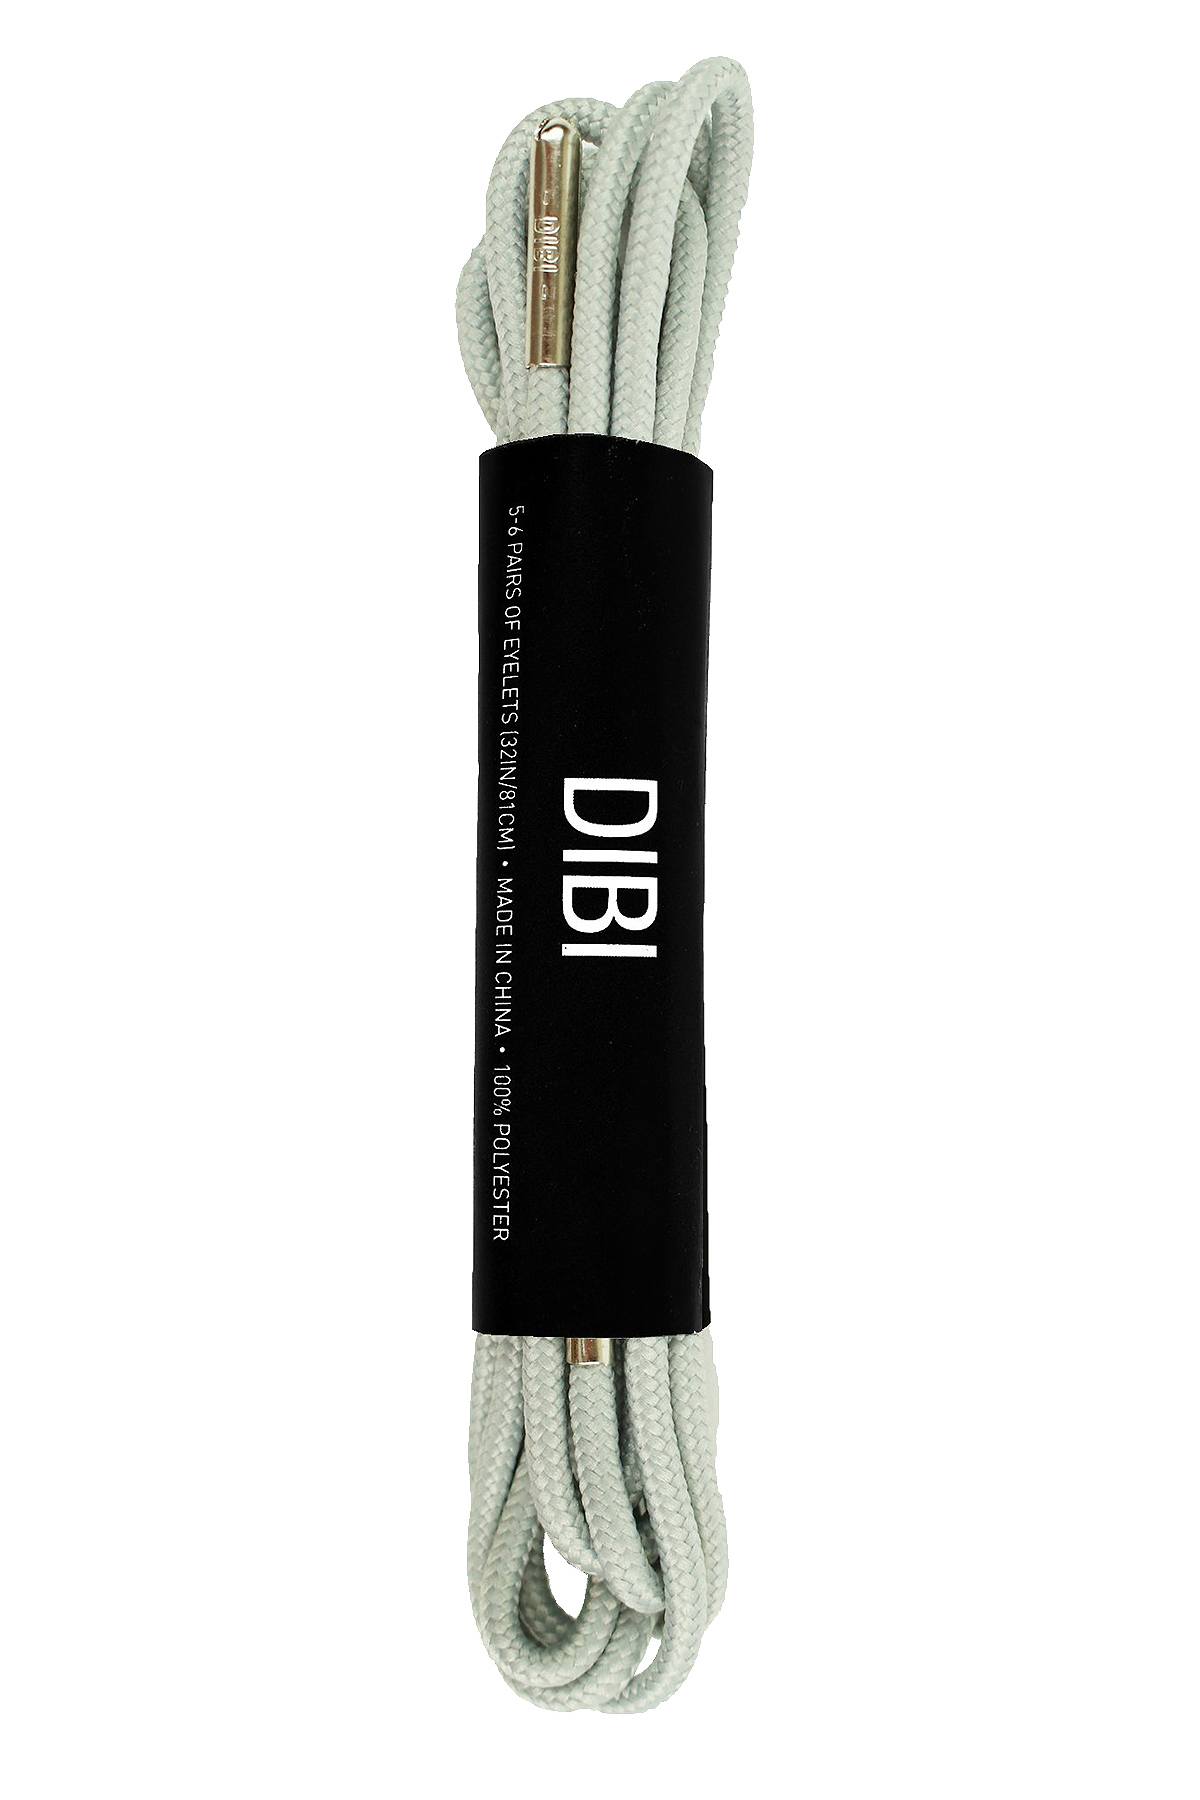 DIBI Solid-Silver Dress Shoelaces w/ Silver Aglets